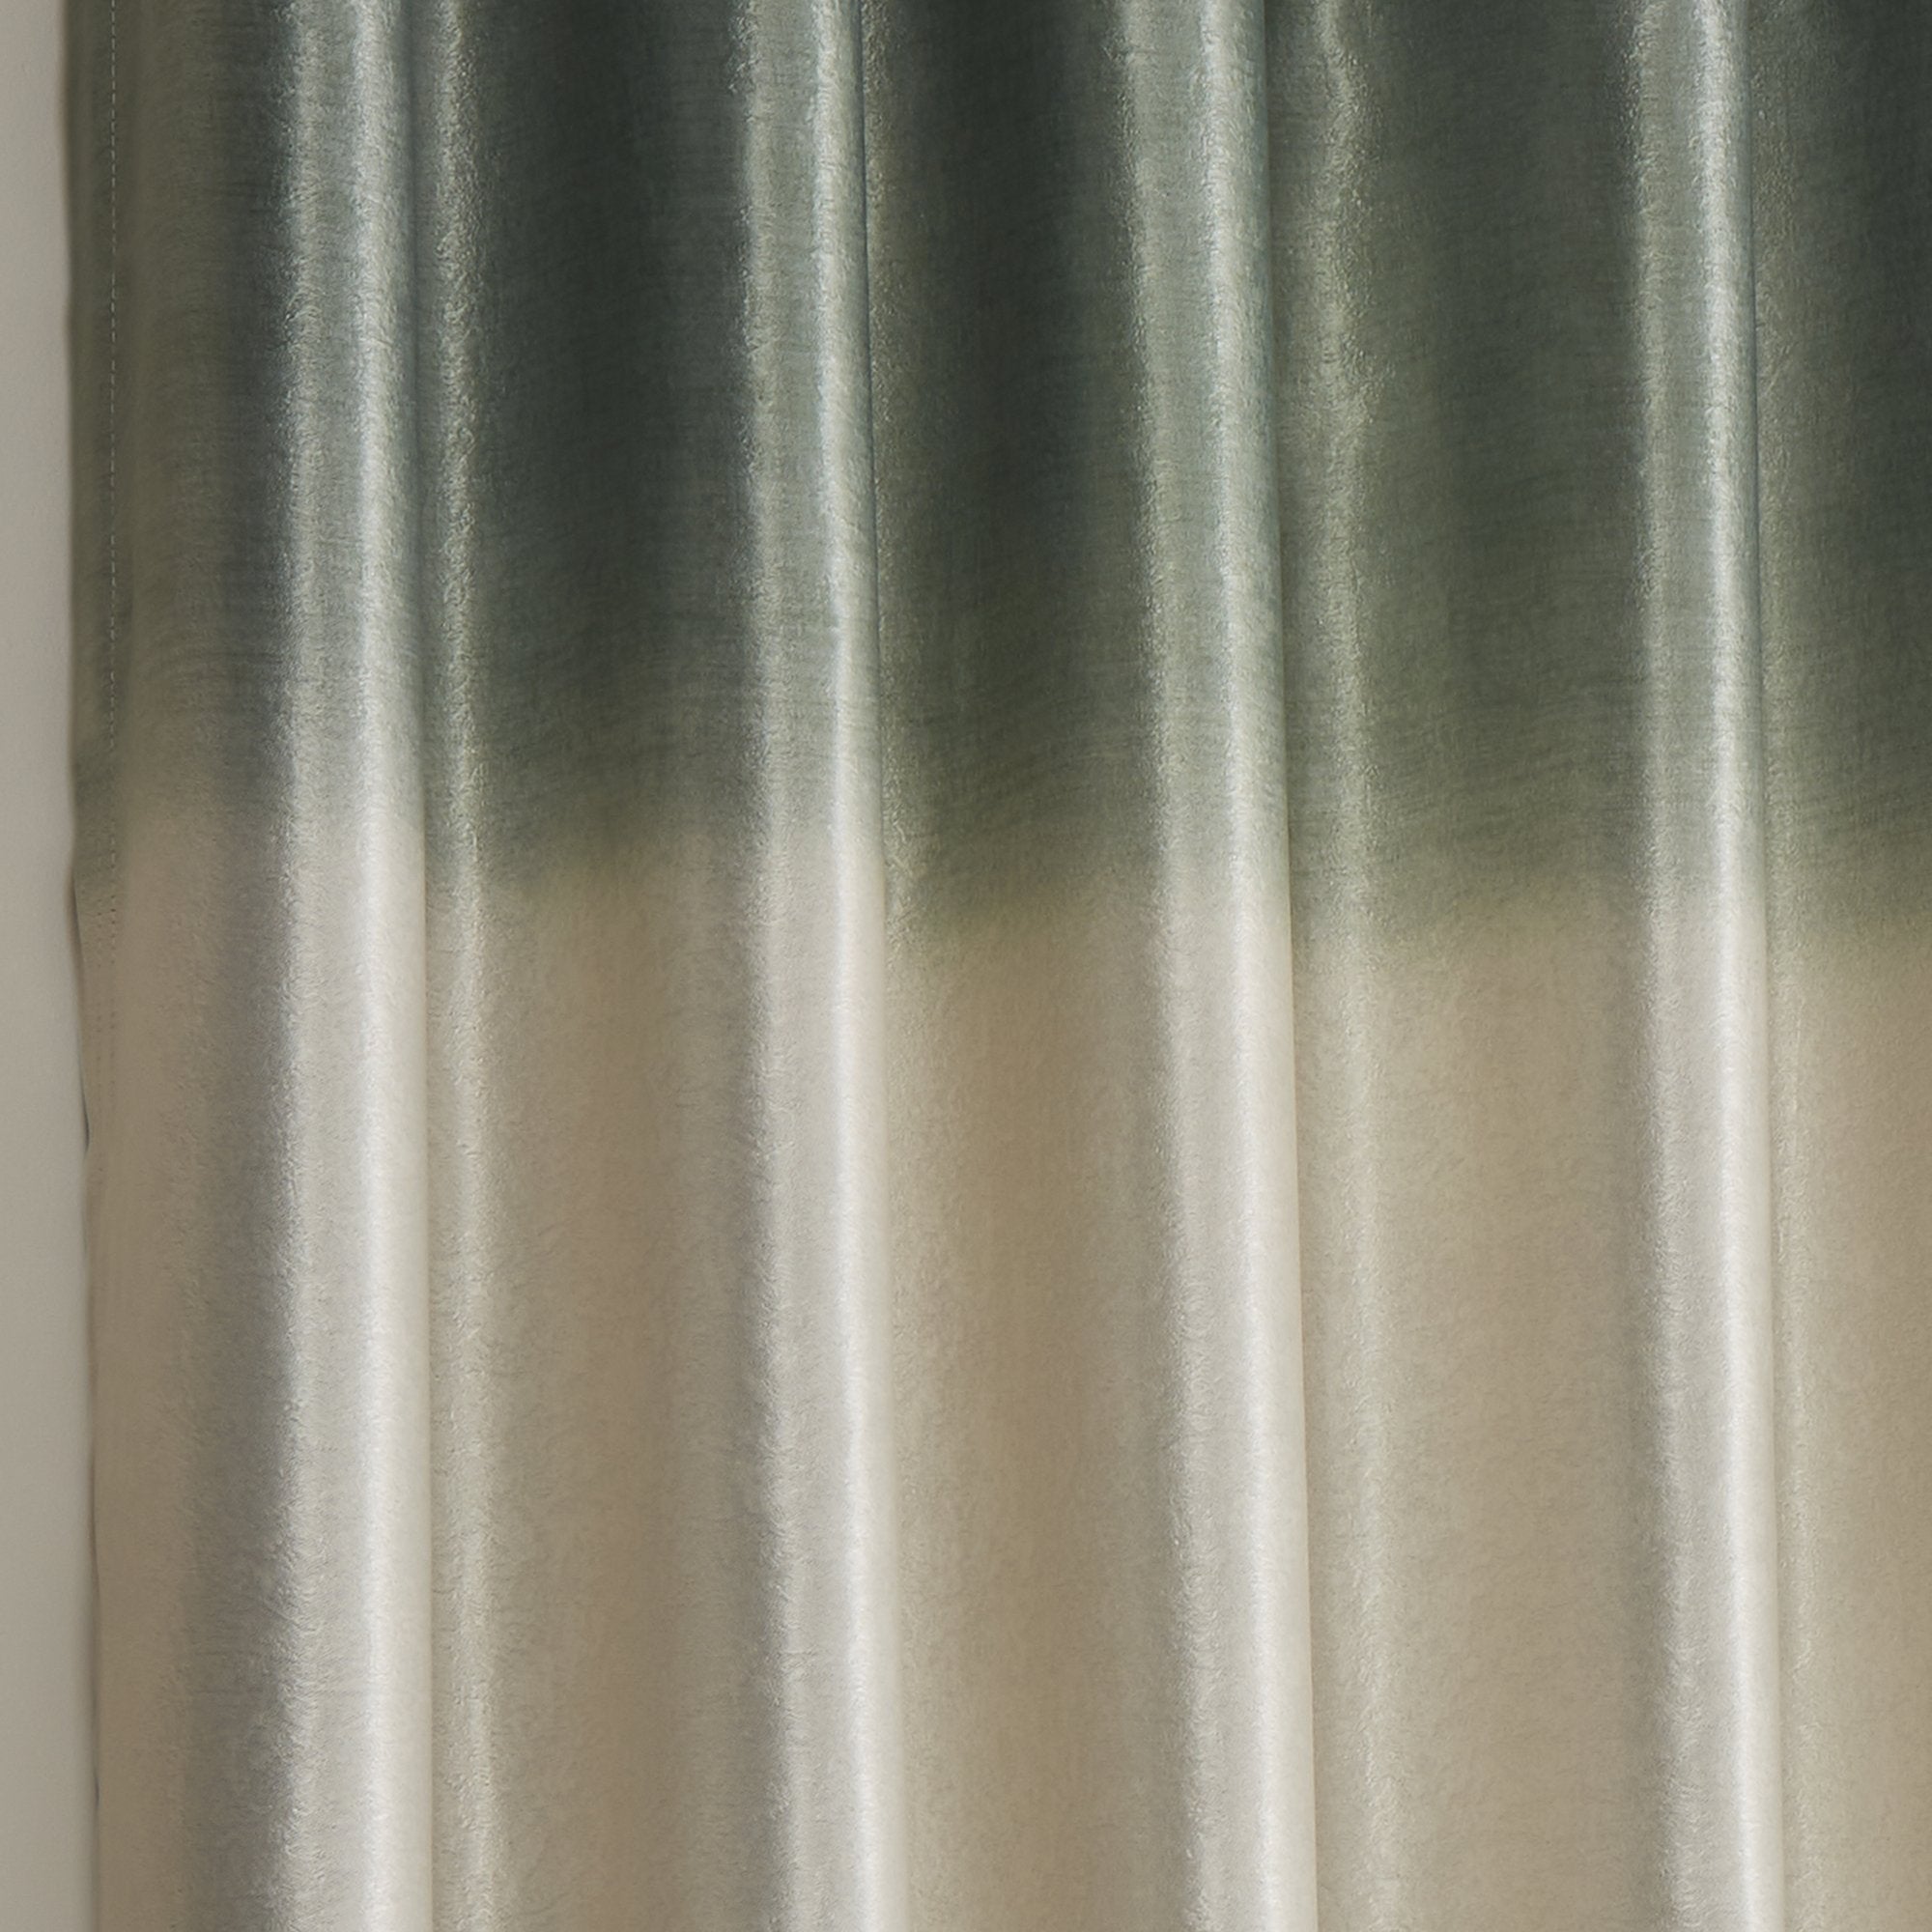 Pair of Eyelet Curtains Ombre Strata by Fusion in Green